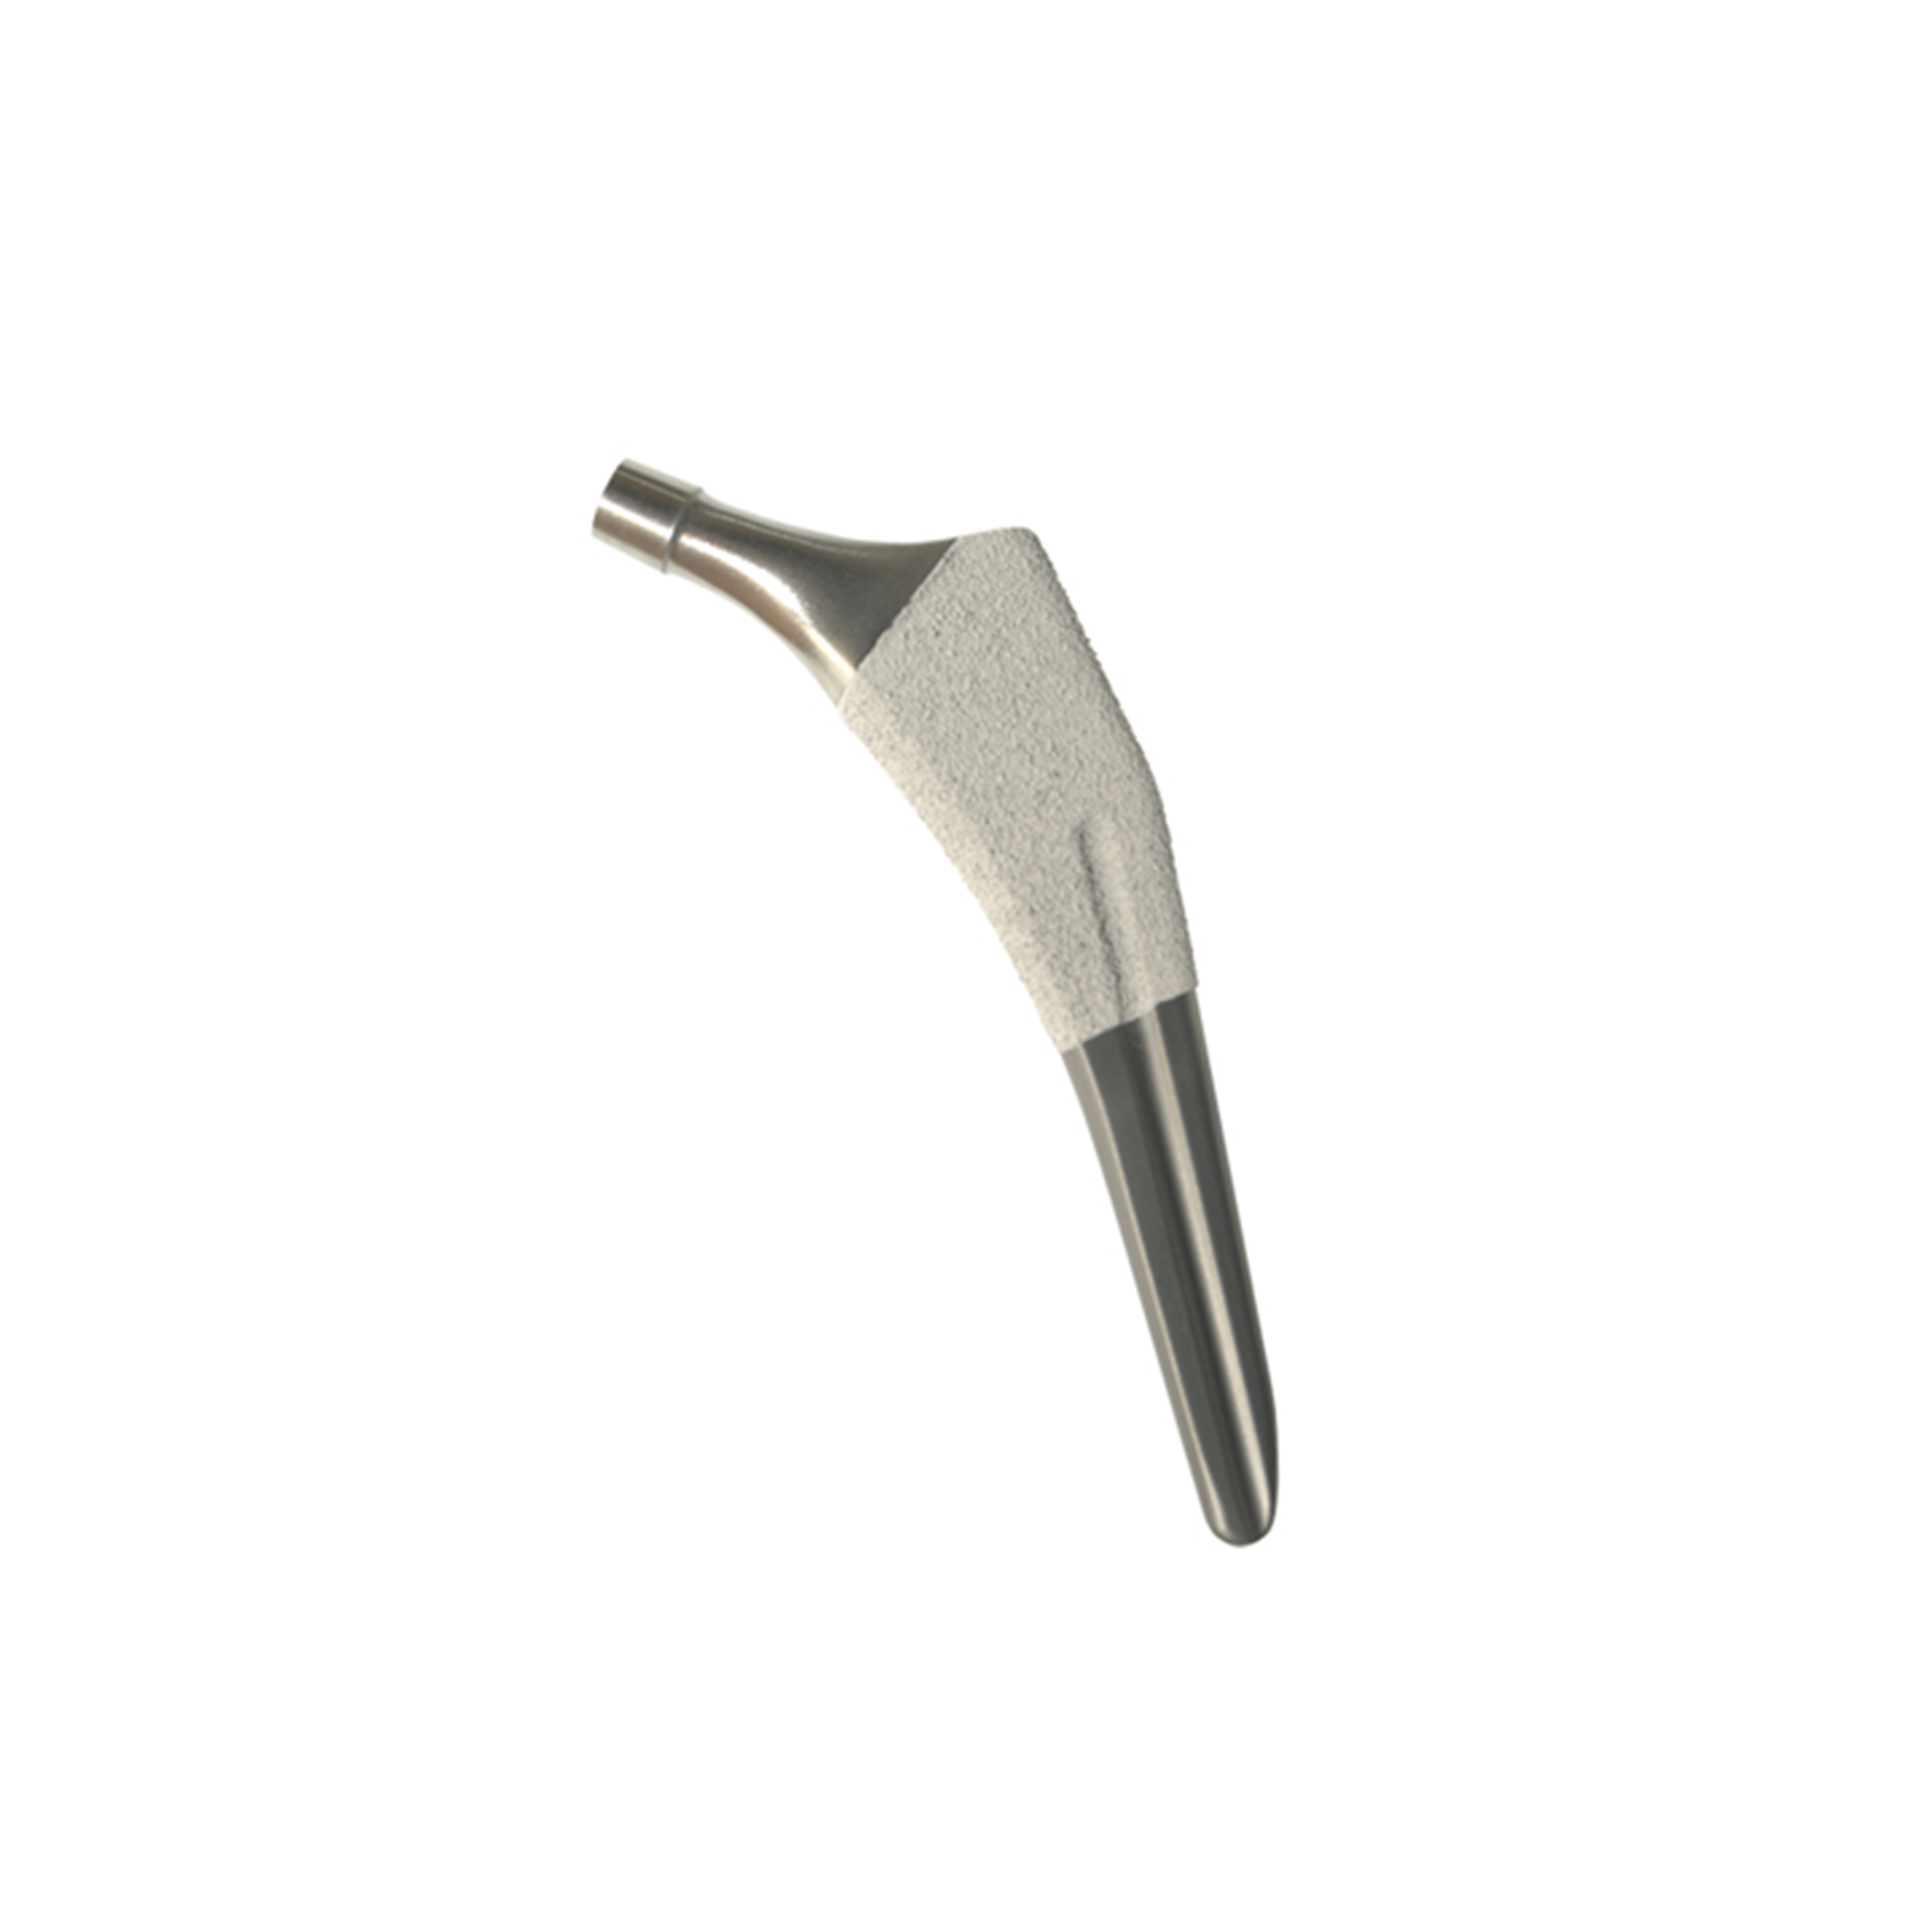 Accolade II | Accolade II is a tapered wedge stem that has been designed to fit more patients while accommodating a variety of surgical approaches.